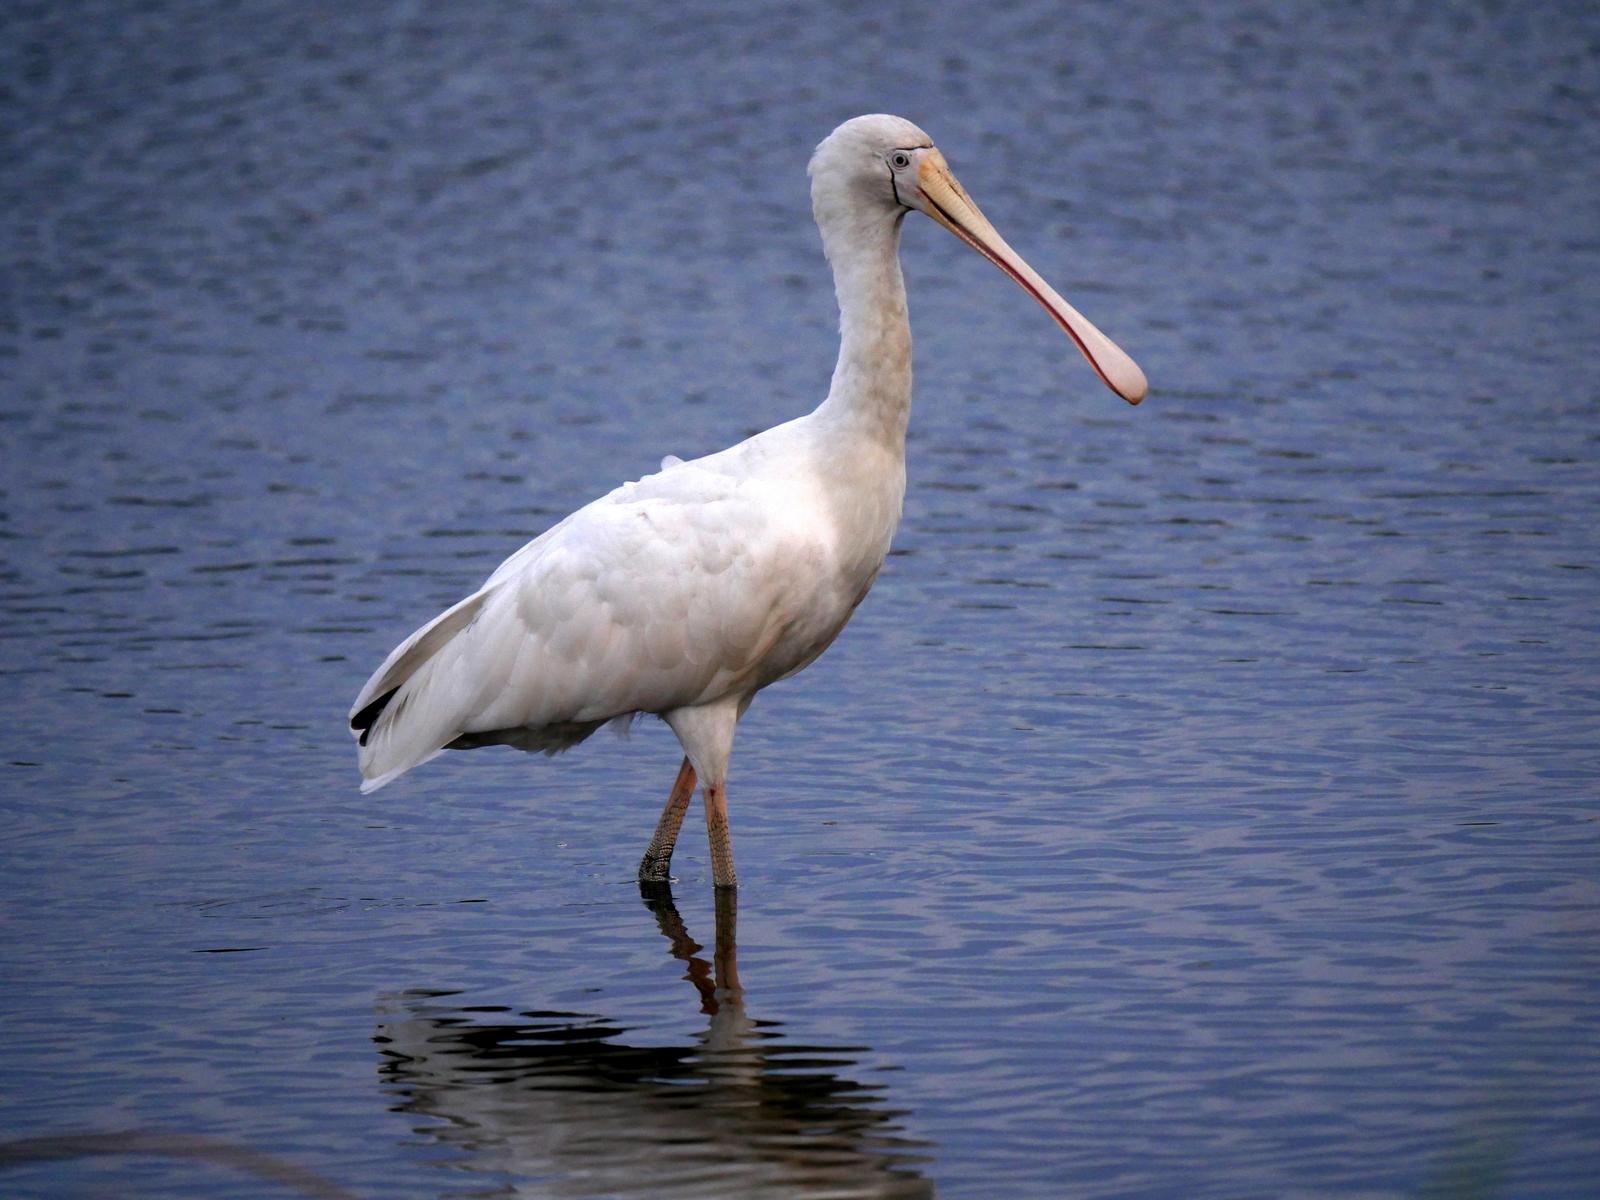 Yellow-billed Spoonbill Photo by Peter Lowe